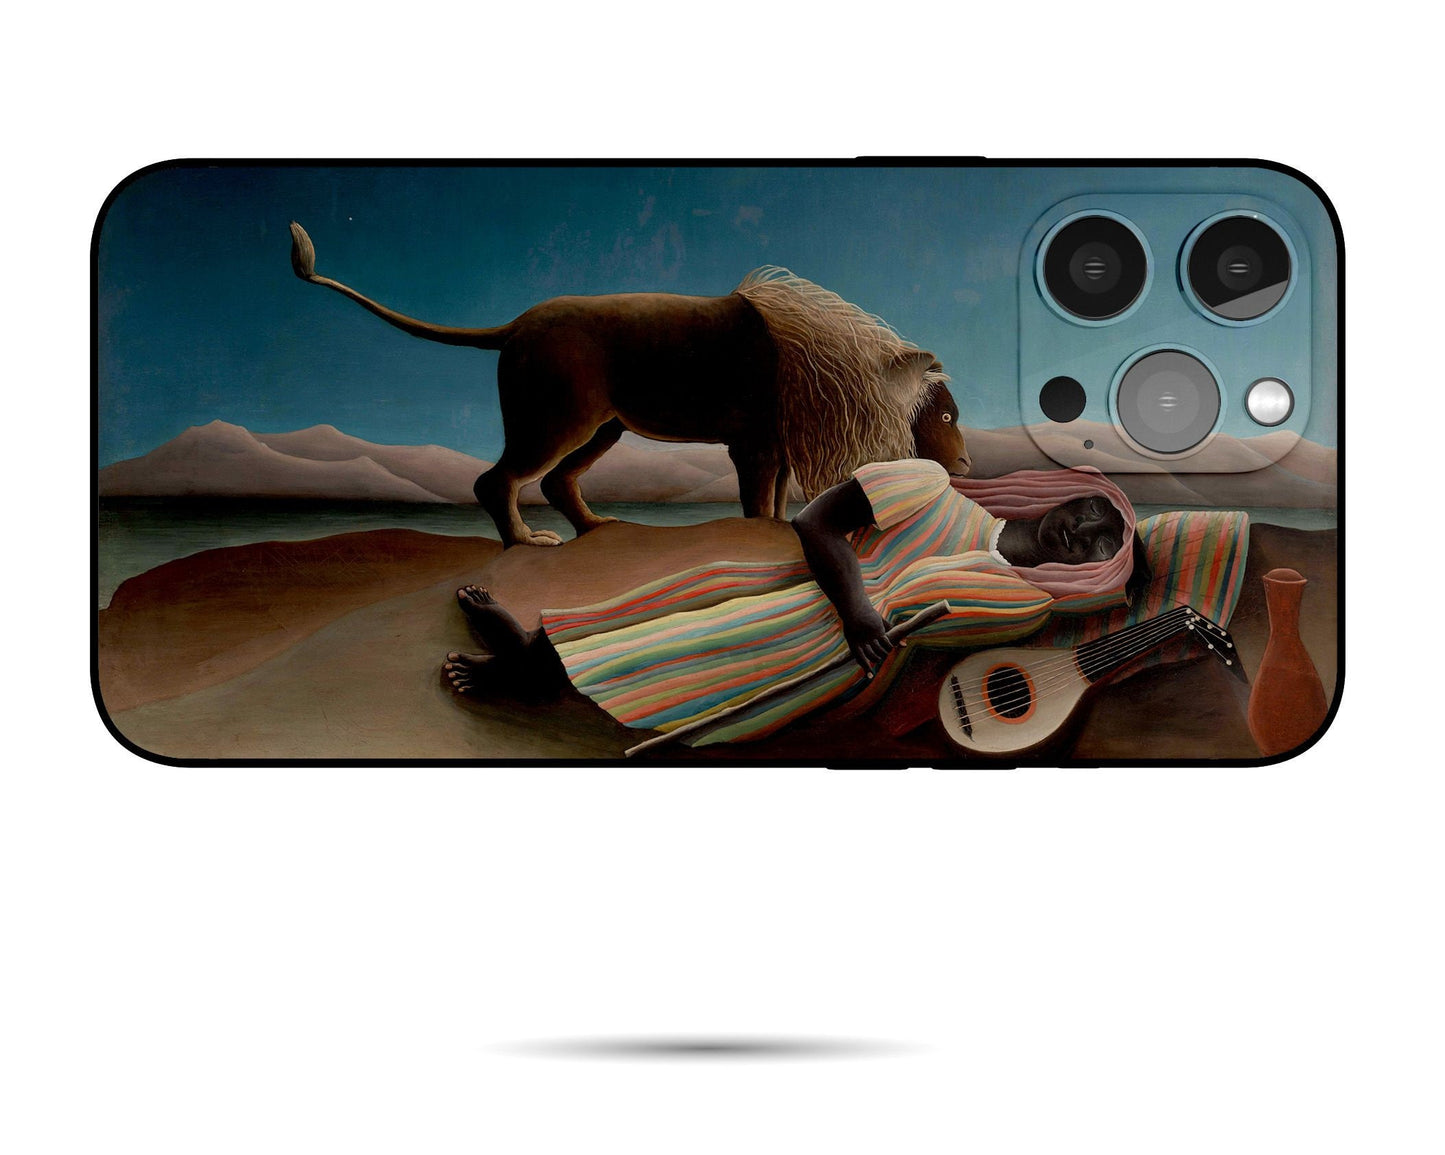 Iphone 14 Case Of Henri Rousseau Famous Painting, Iphone 11 Pro Max, Iphone Xr Case, Designer Iphone Case, Protective Case, Silicone Case